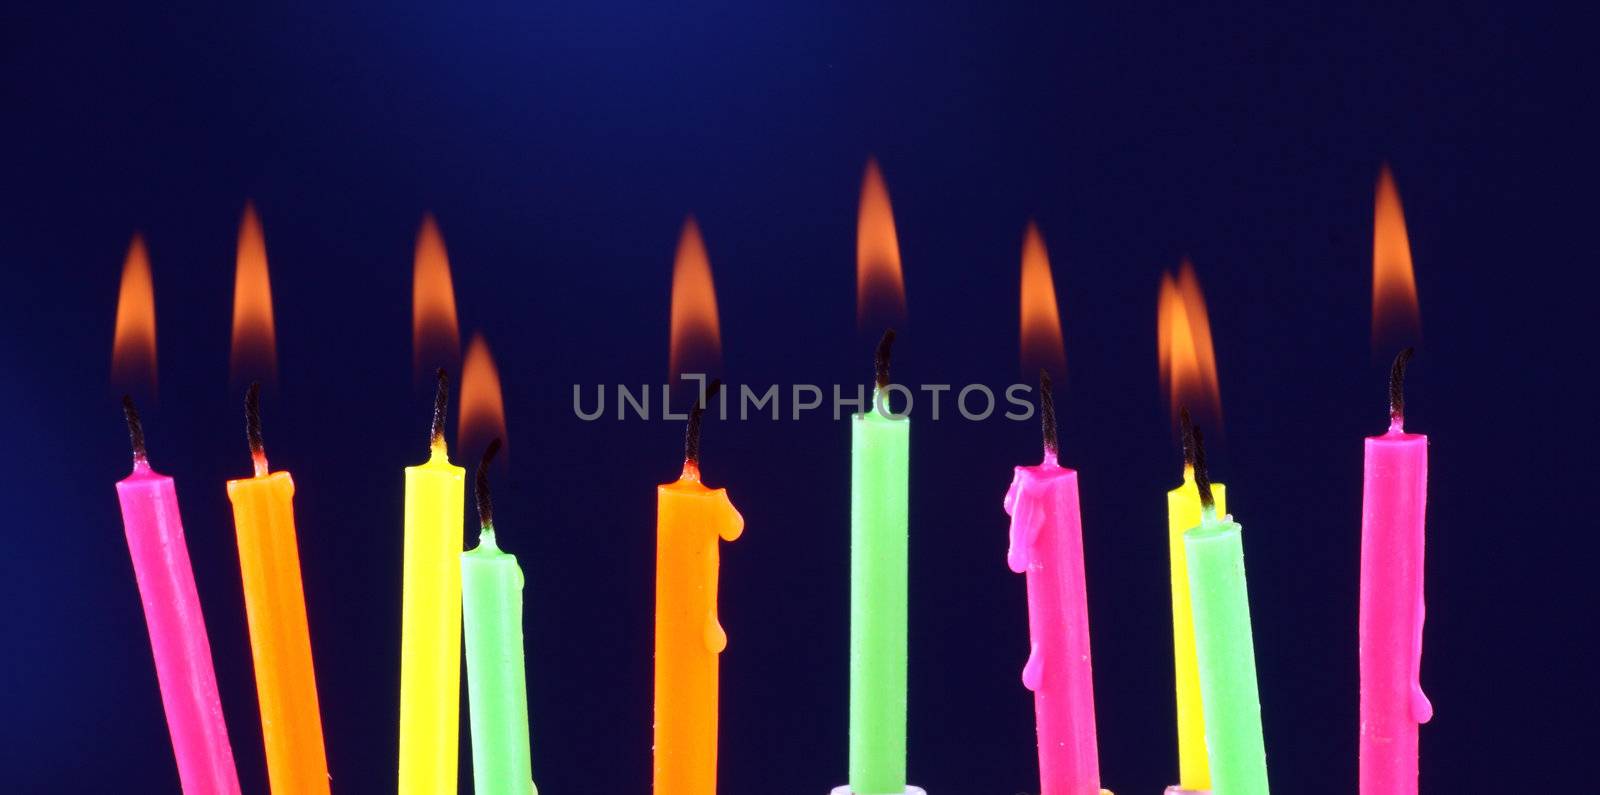 Some lit birthday candles close up 